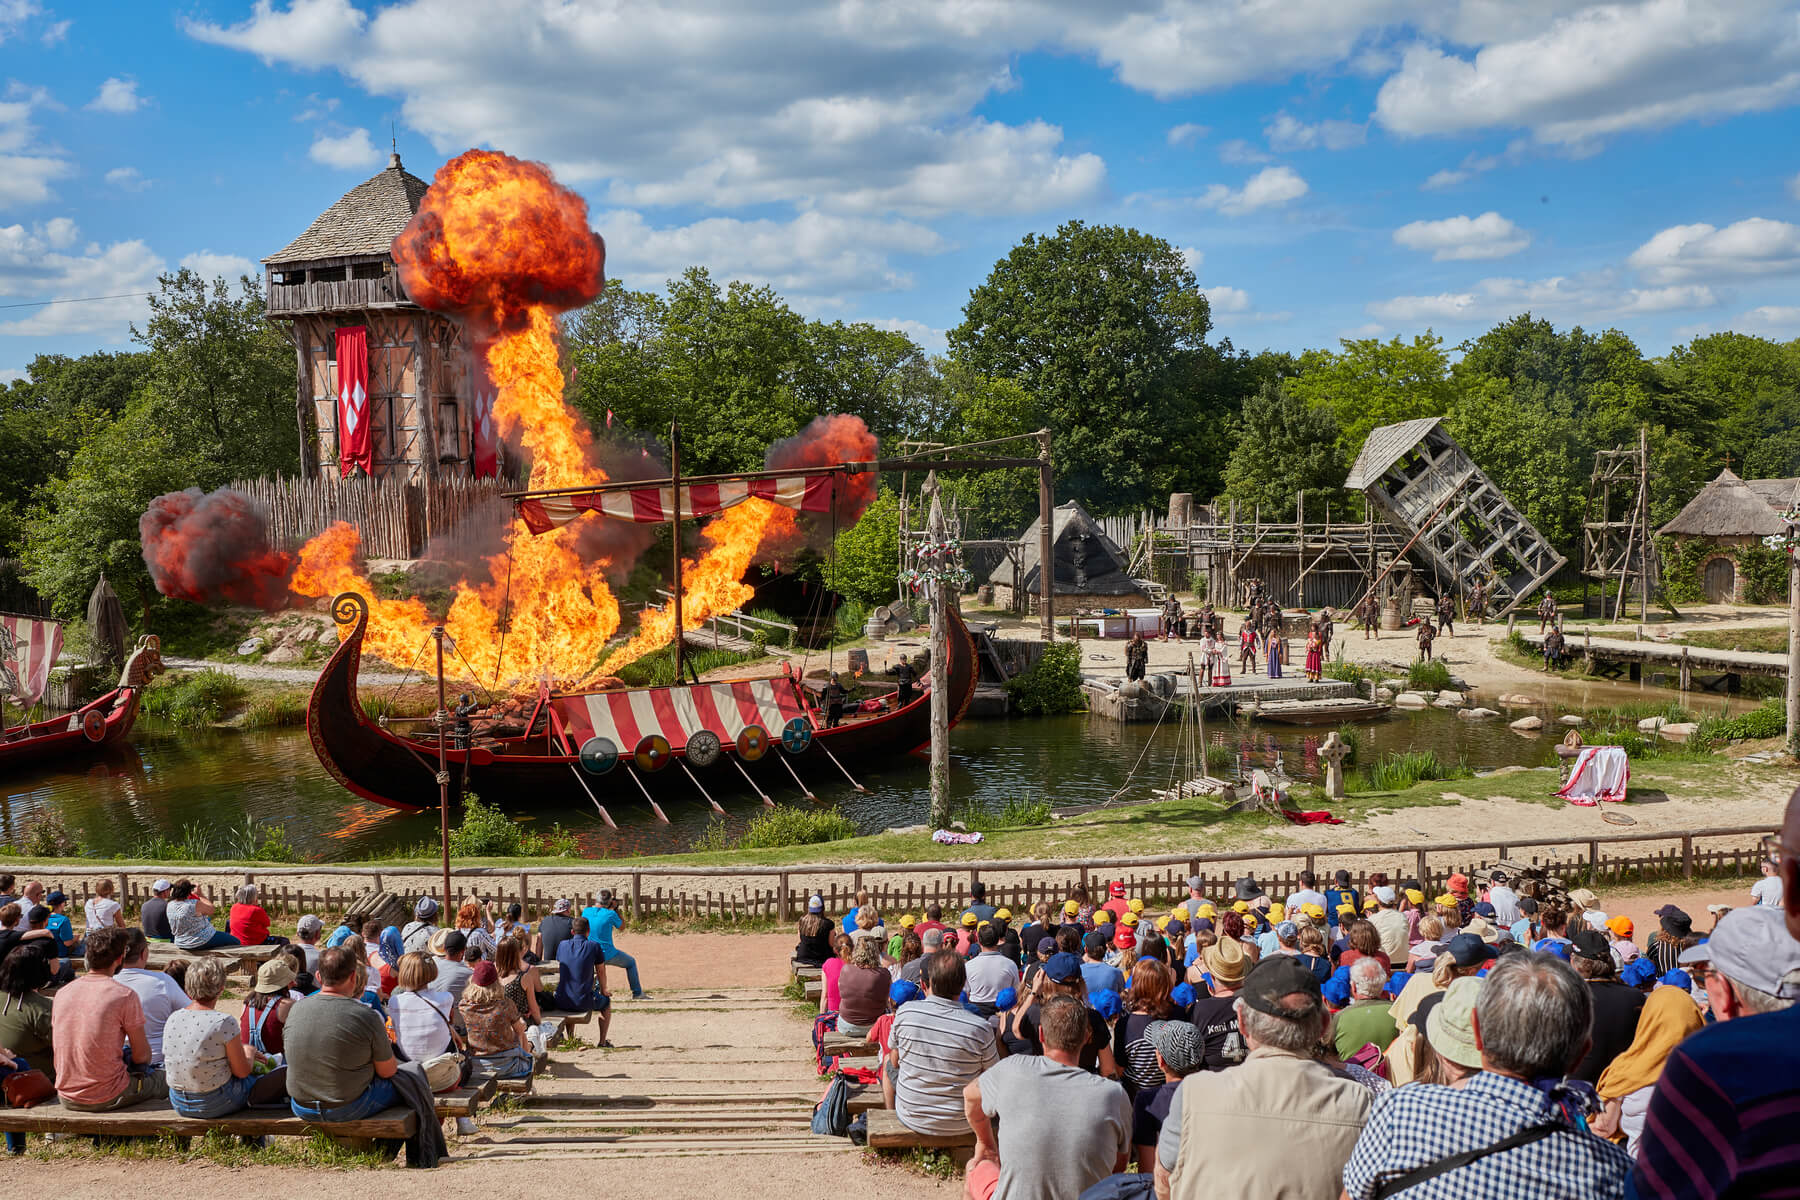 The Vikings show at Puy du Fou